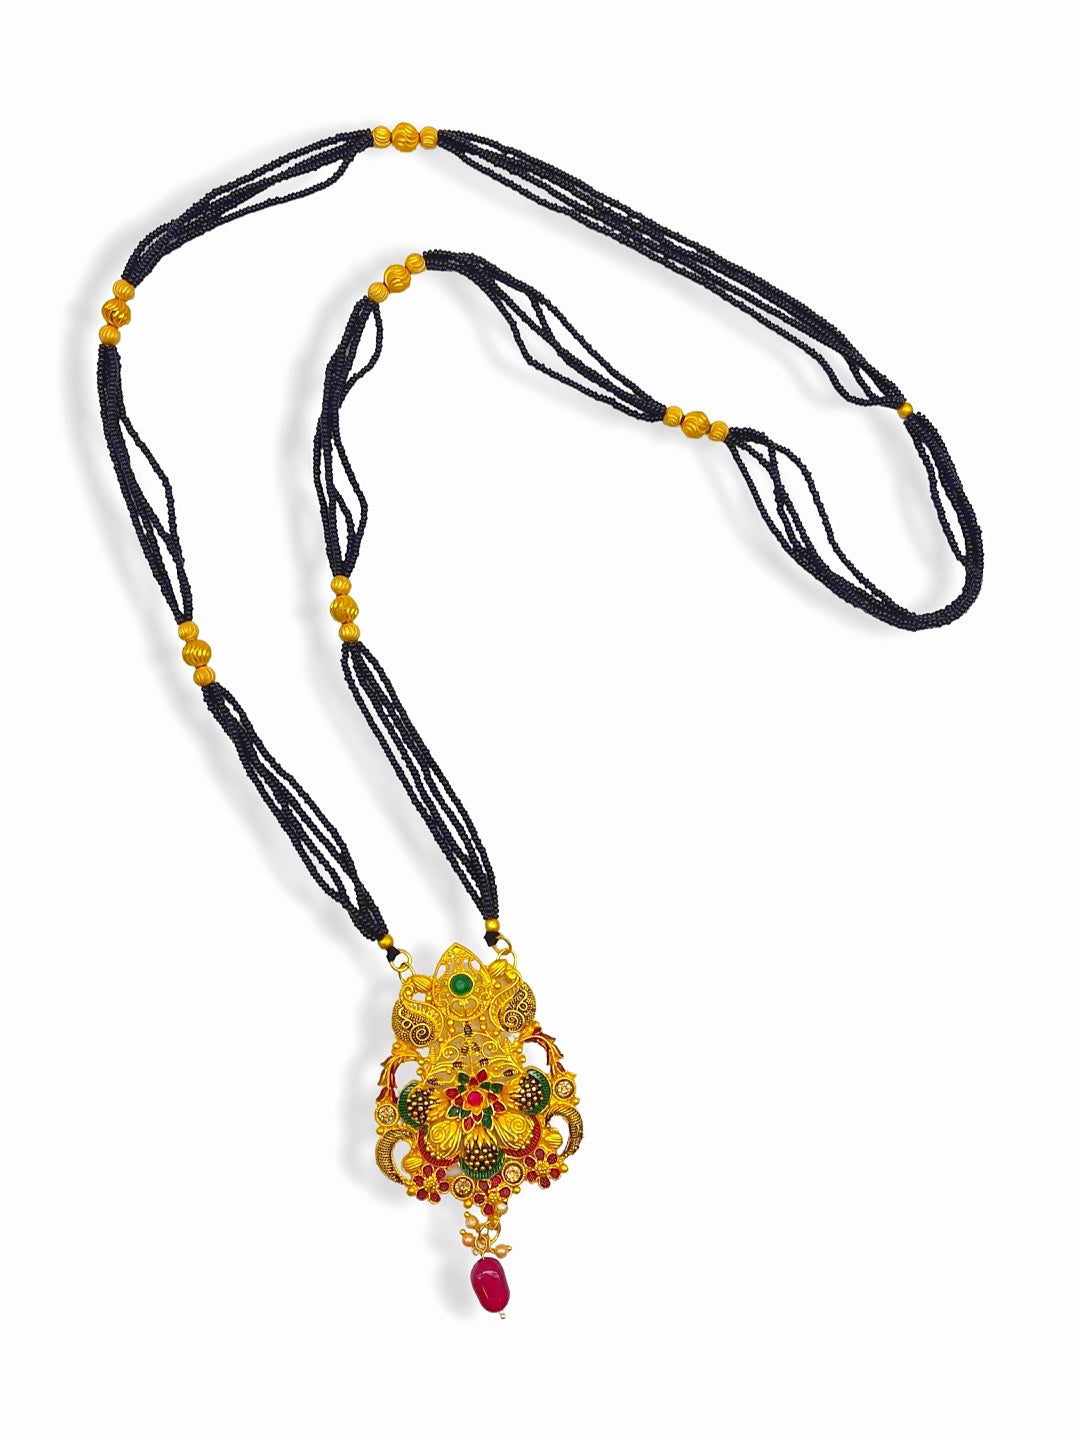 Long Mangalsutra Designs heavy gold mangalsutra with multiple black beads chain Flower thali mangalsutra (41 Inches)